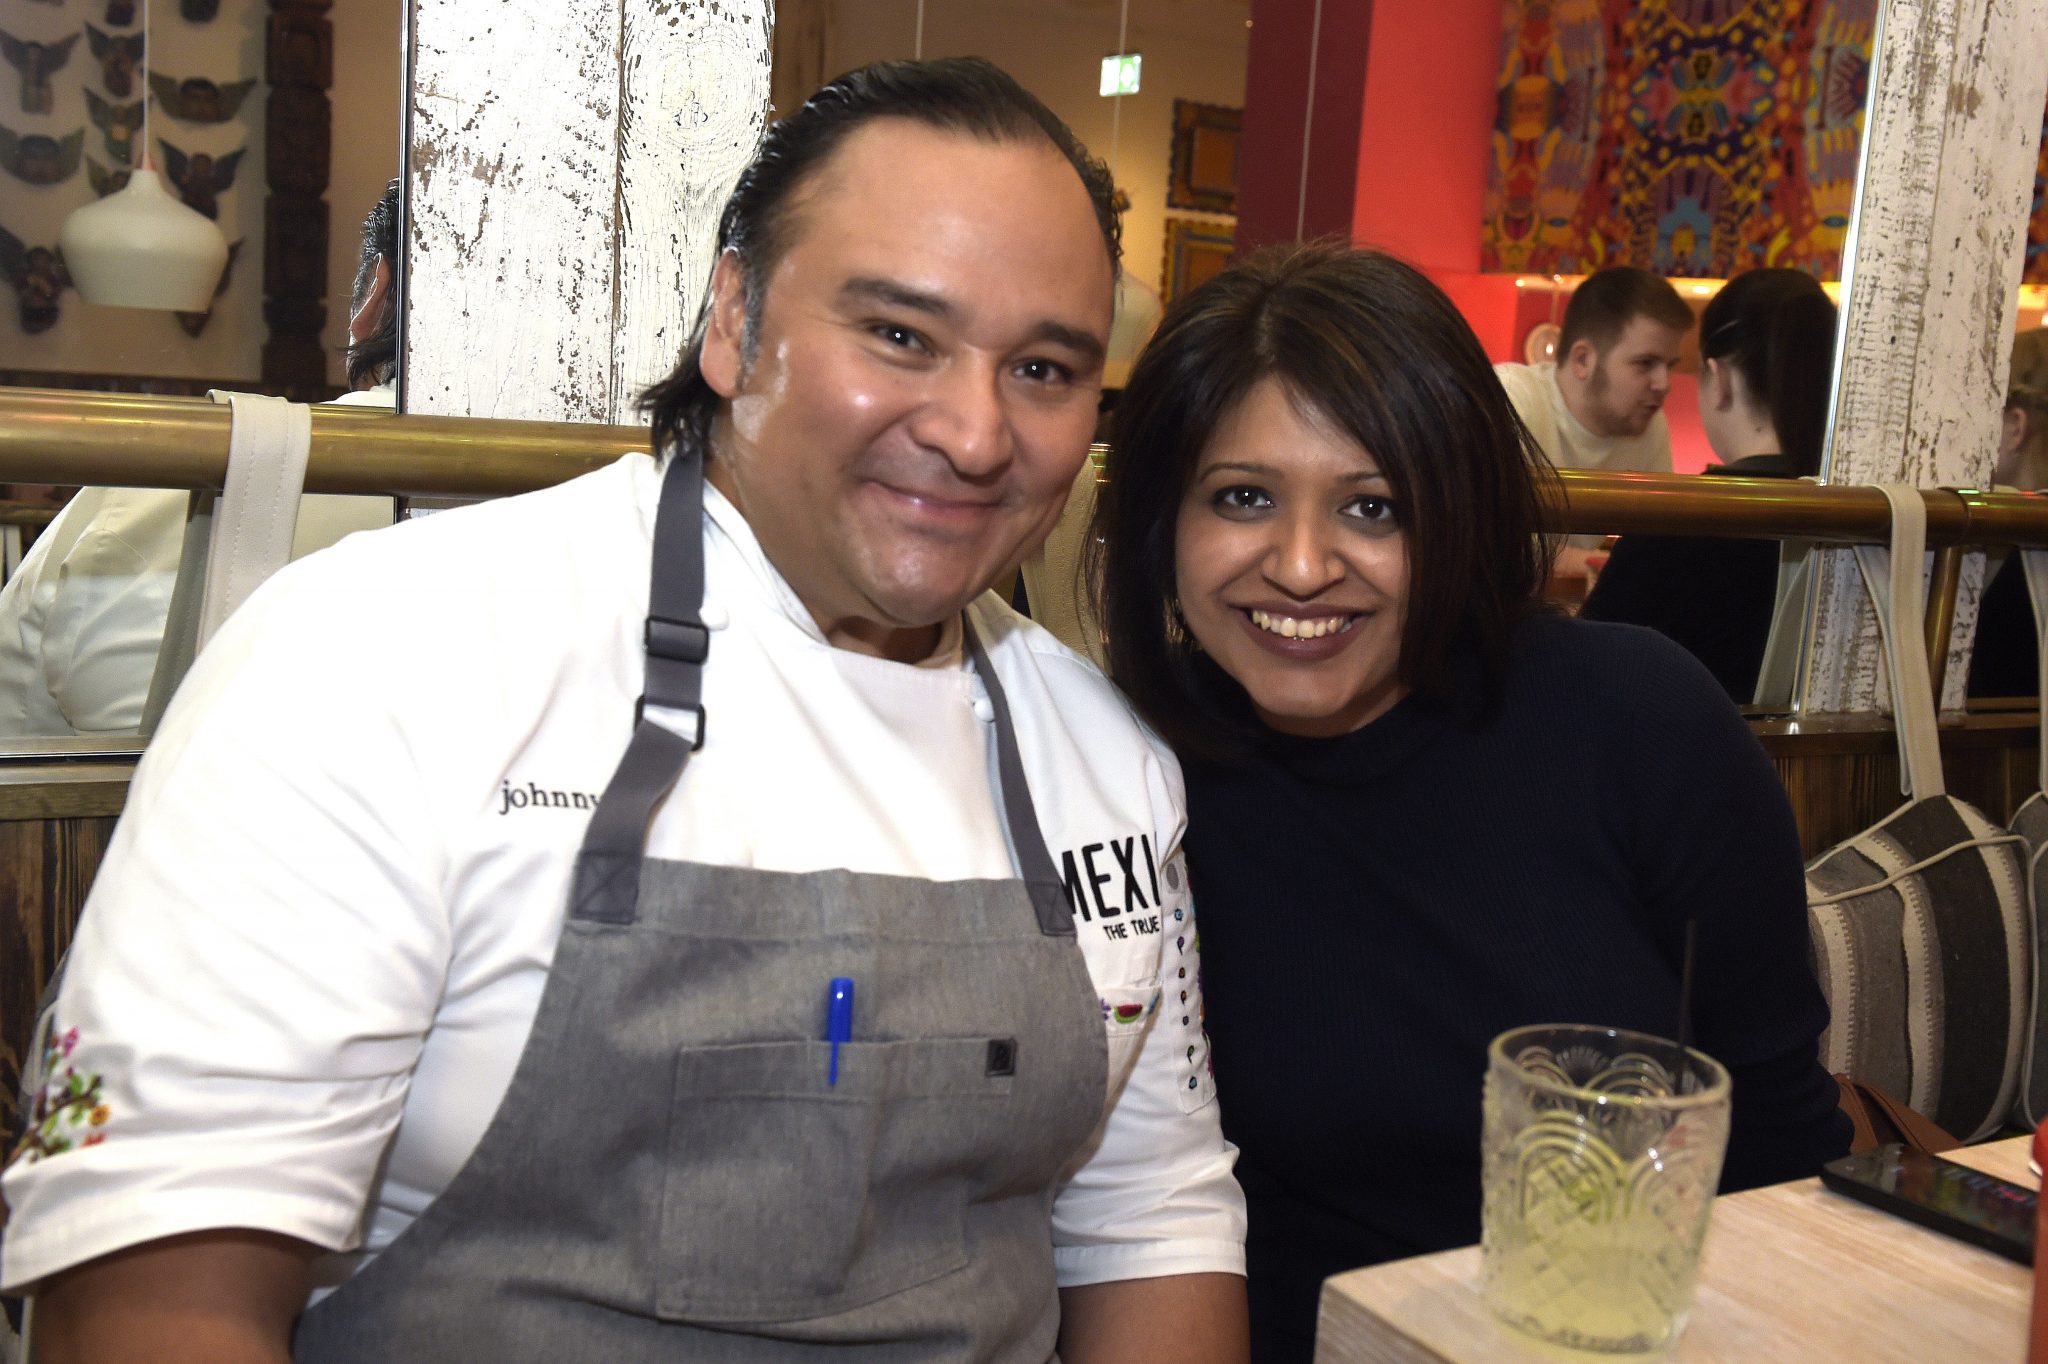 MEXIco storms into Derby as destination restaurant in East Midlands